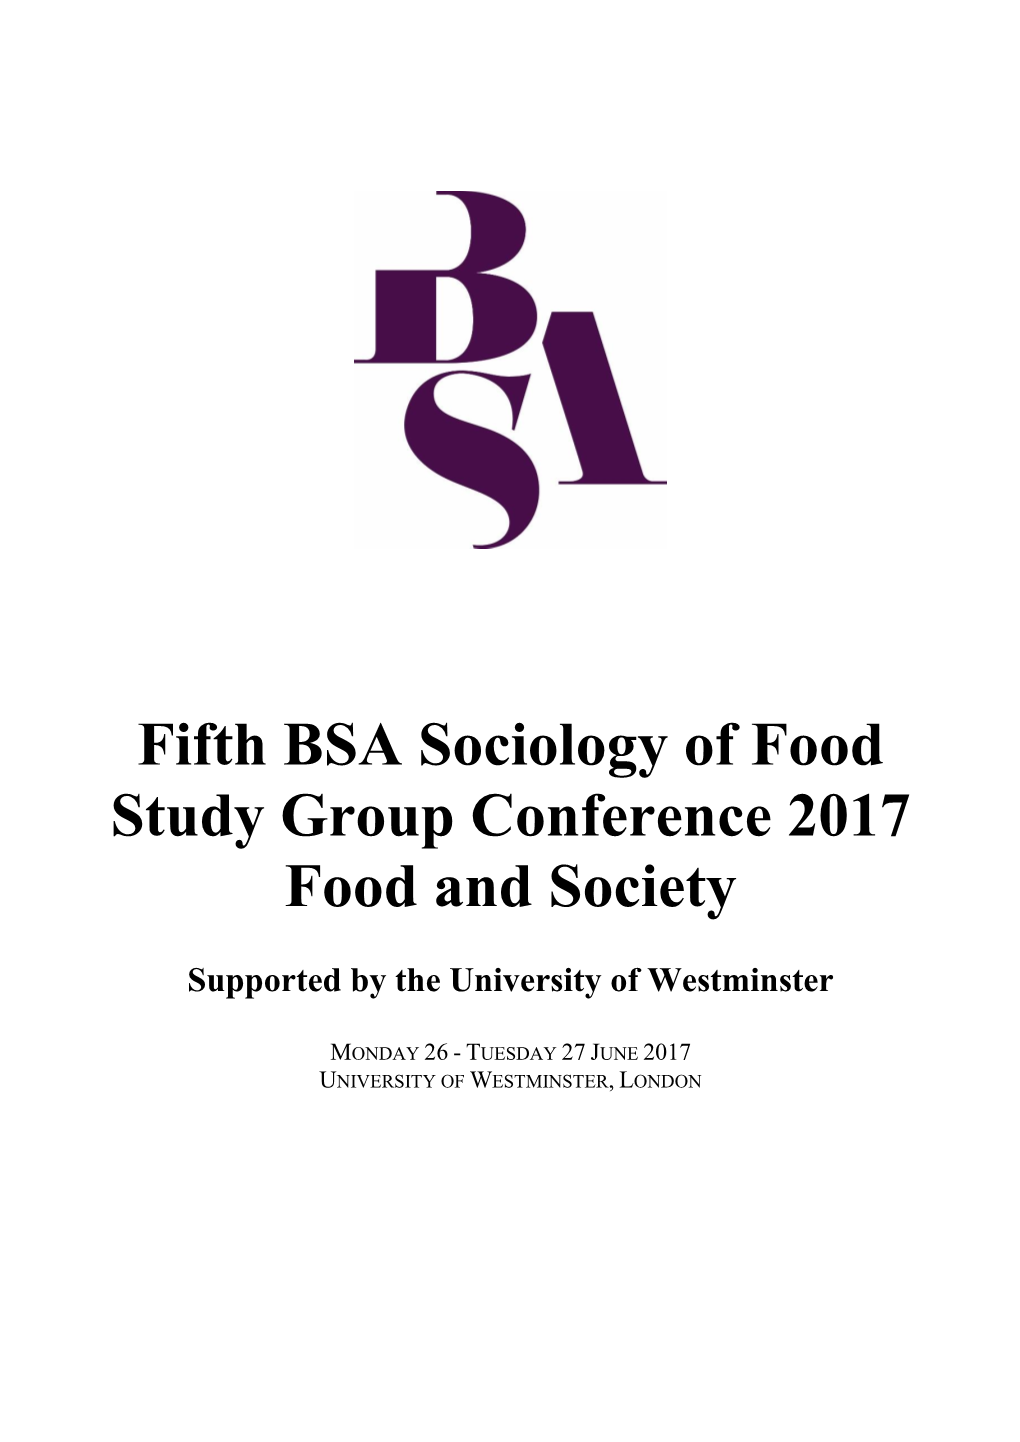 Fifth BSA Food Study Group Conference, Food & Society 2017